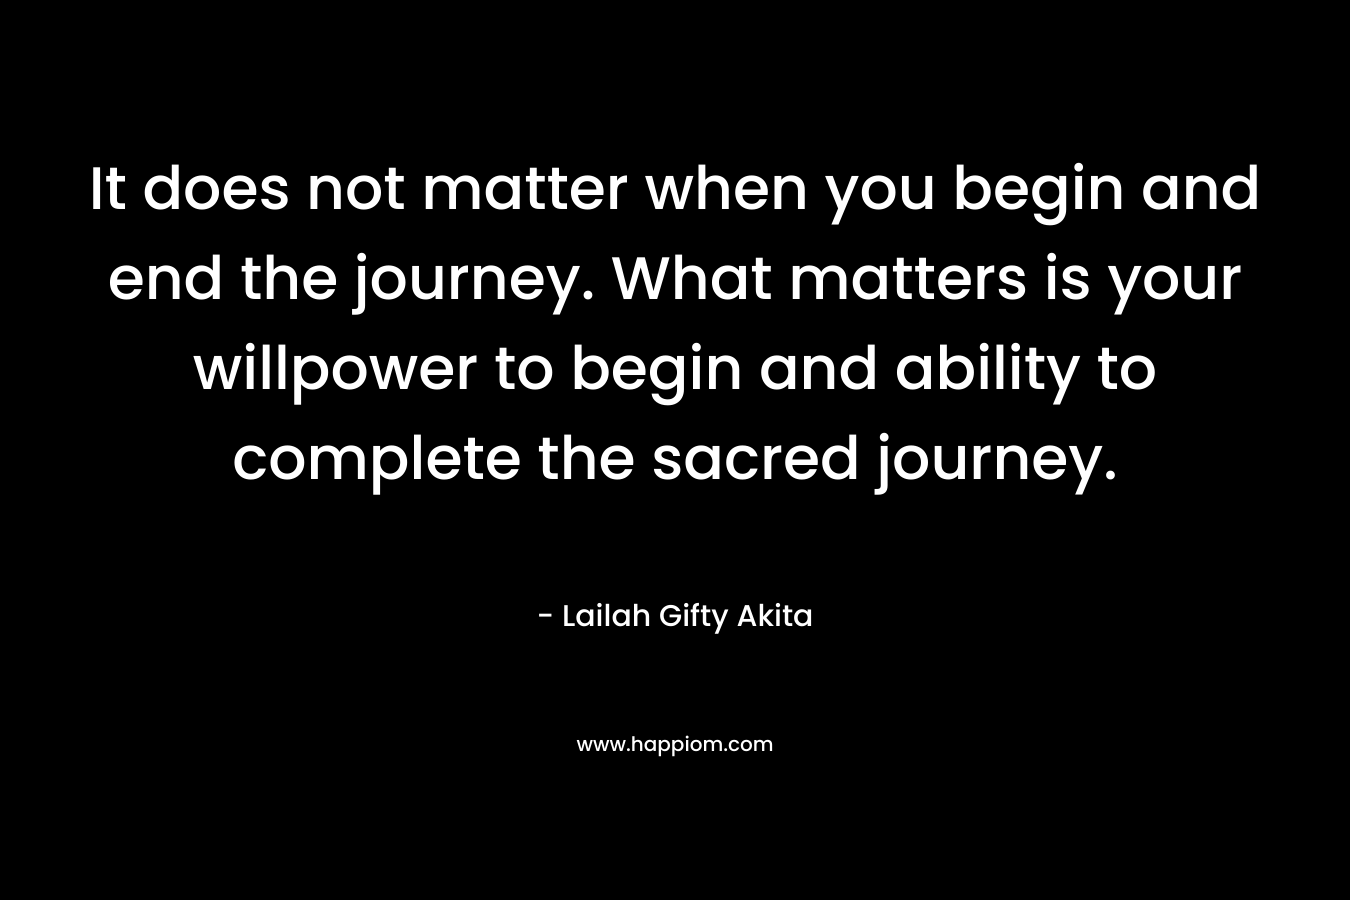 It does not matter when you begin and end the journey. What matters is your willpower to begin and ability to complete the sacred journey.